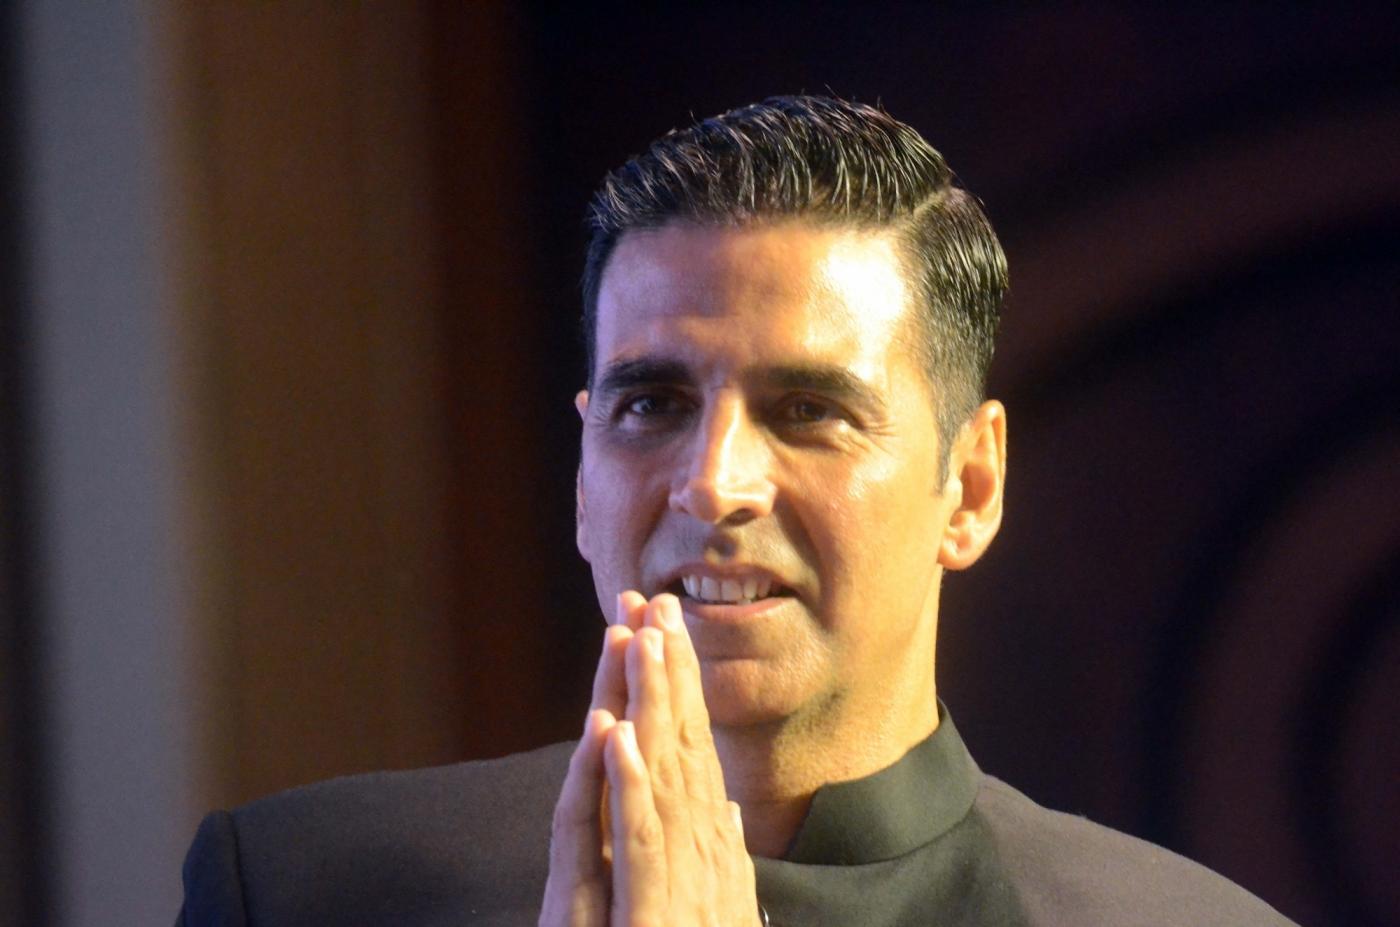 Mumbai: Actor Akshay Kumar during a programme on the occasion of the 'World Toilet Day' in Mumbai on Nov 19, 2018. (Photo: IANS) by . 